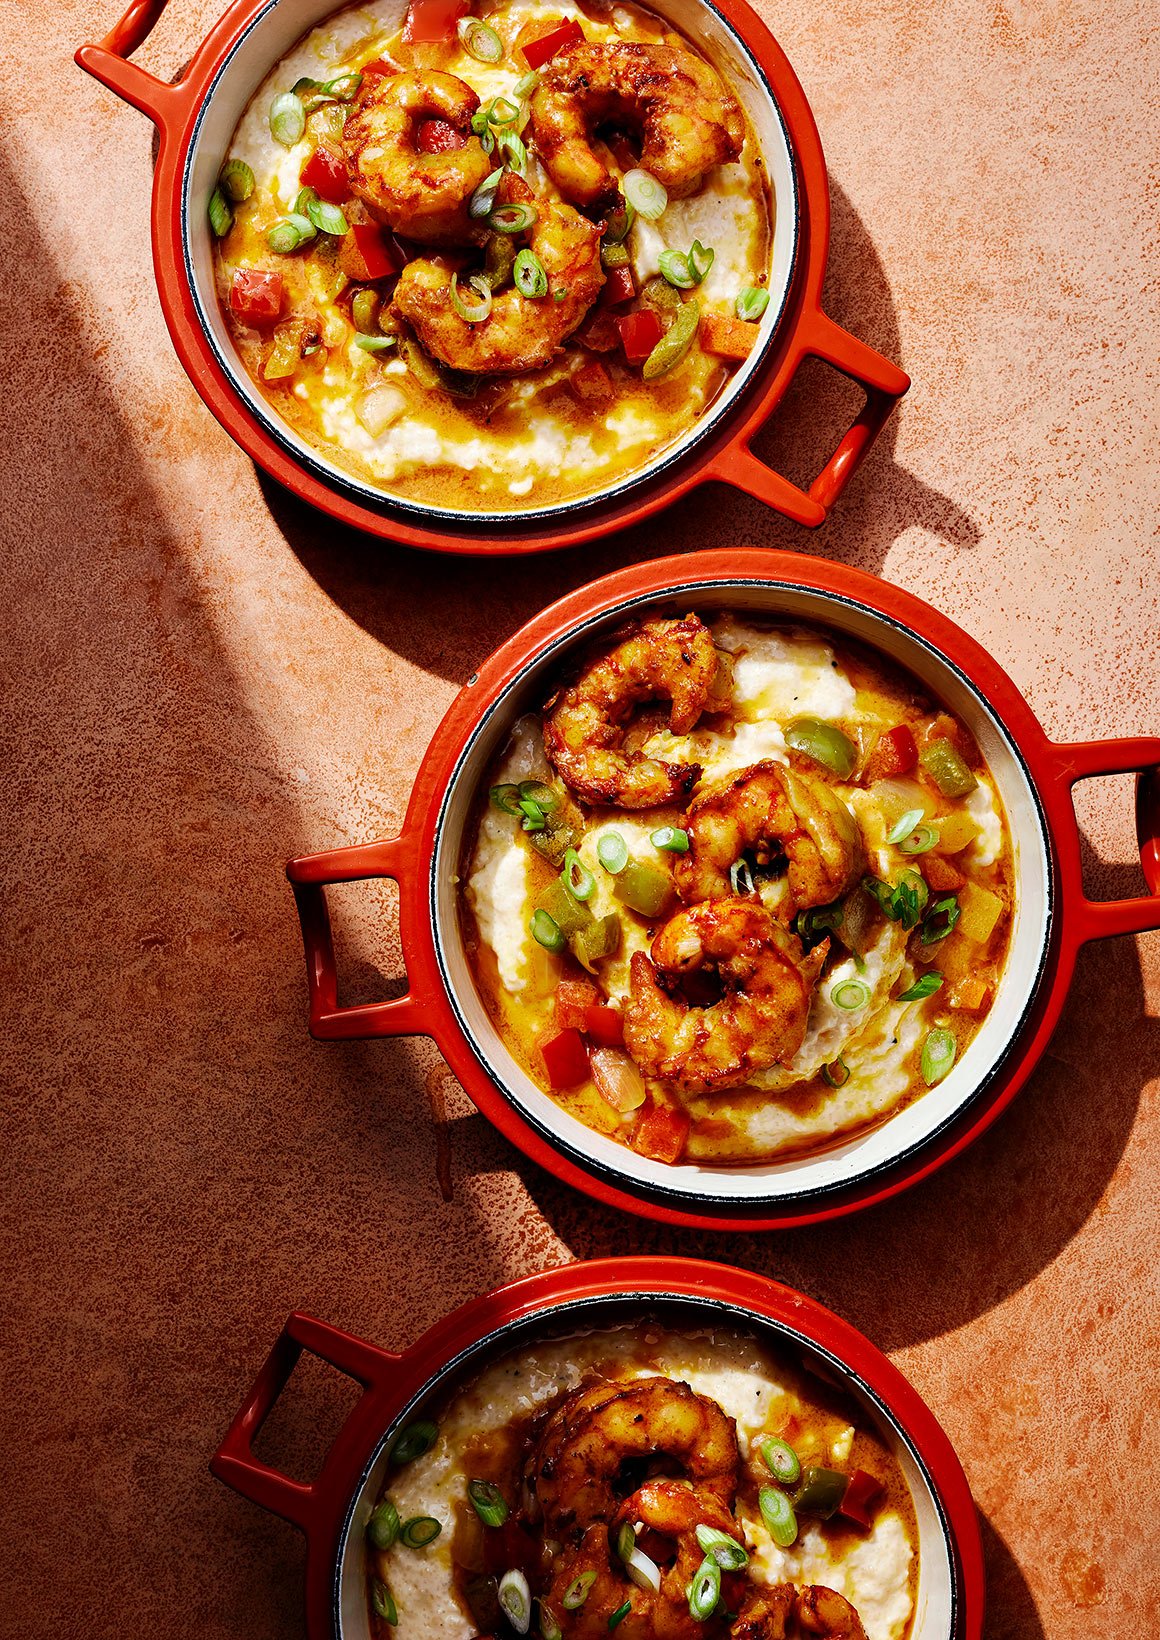 NBA-All-star_Shaquille-Oneal-cooking-Family-stlye-Shrimp-and-Grits-recipe.jpg